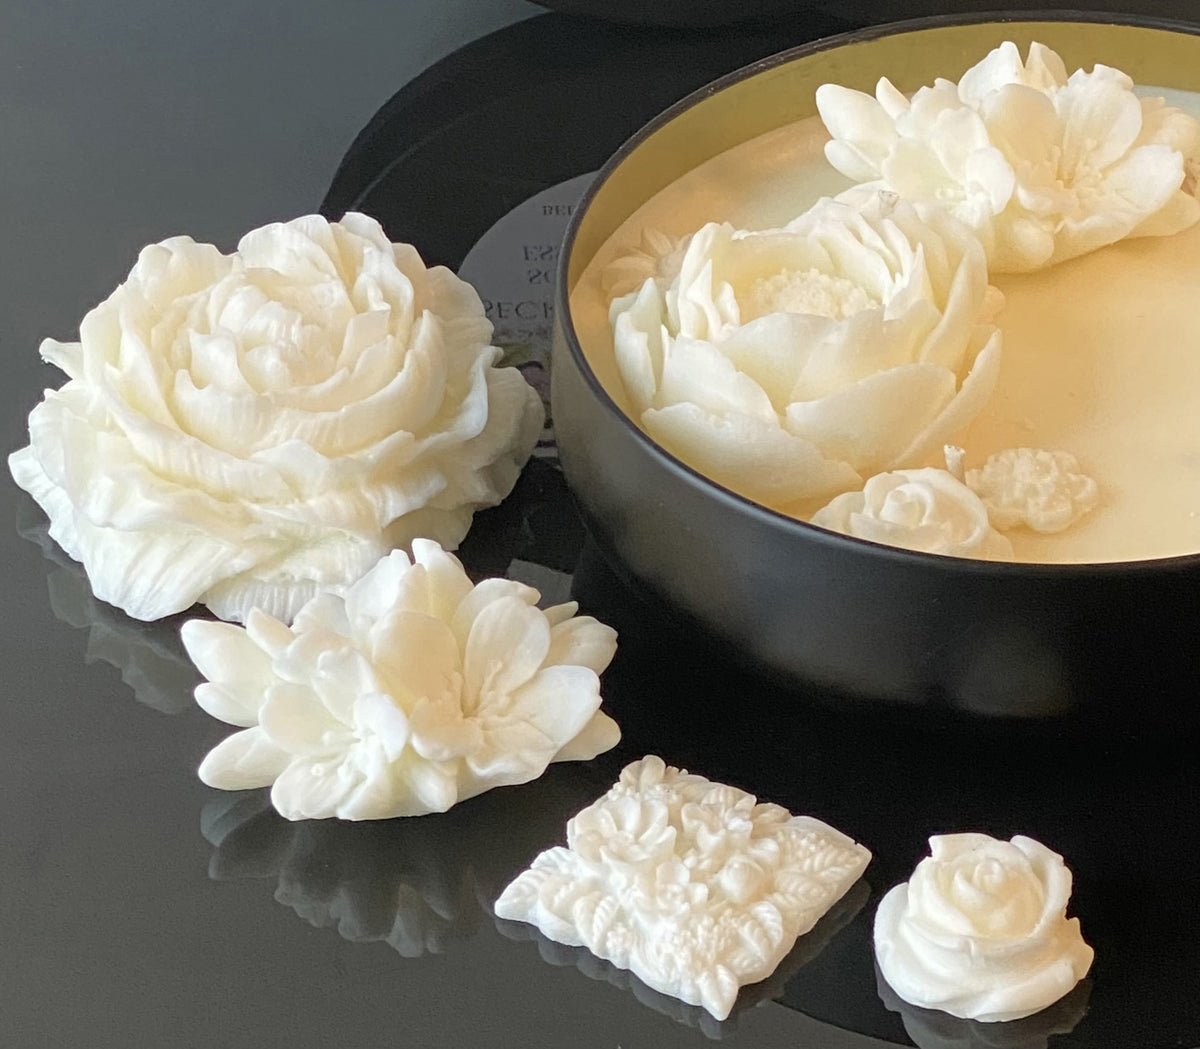 Secret Flower Garden Candles infused with pure Essential oils with detailed Soy Wax Flowers